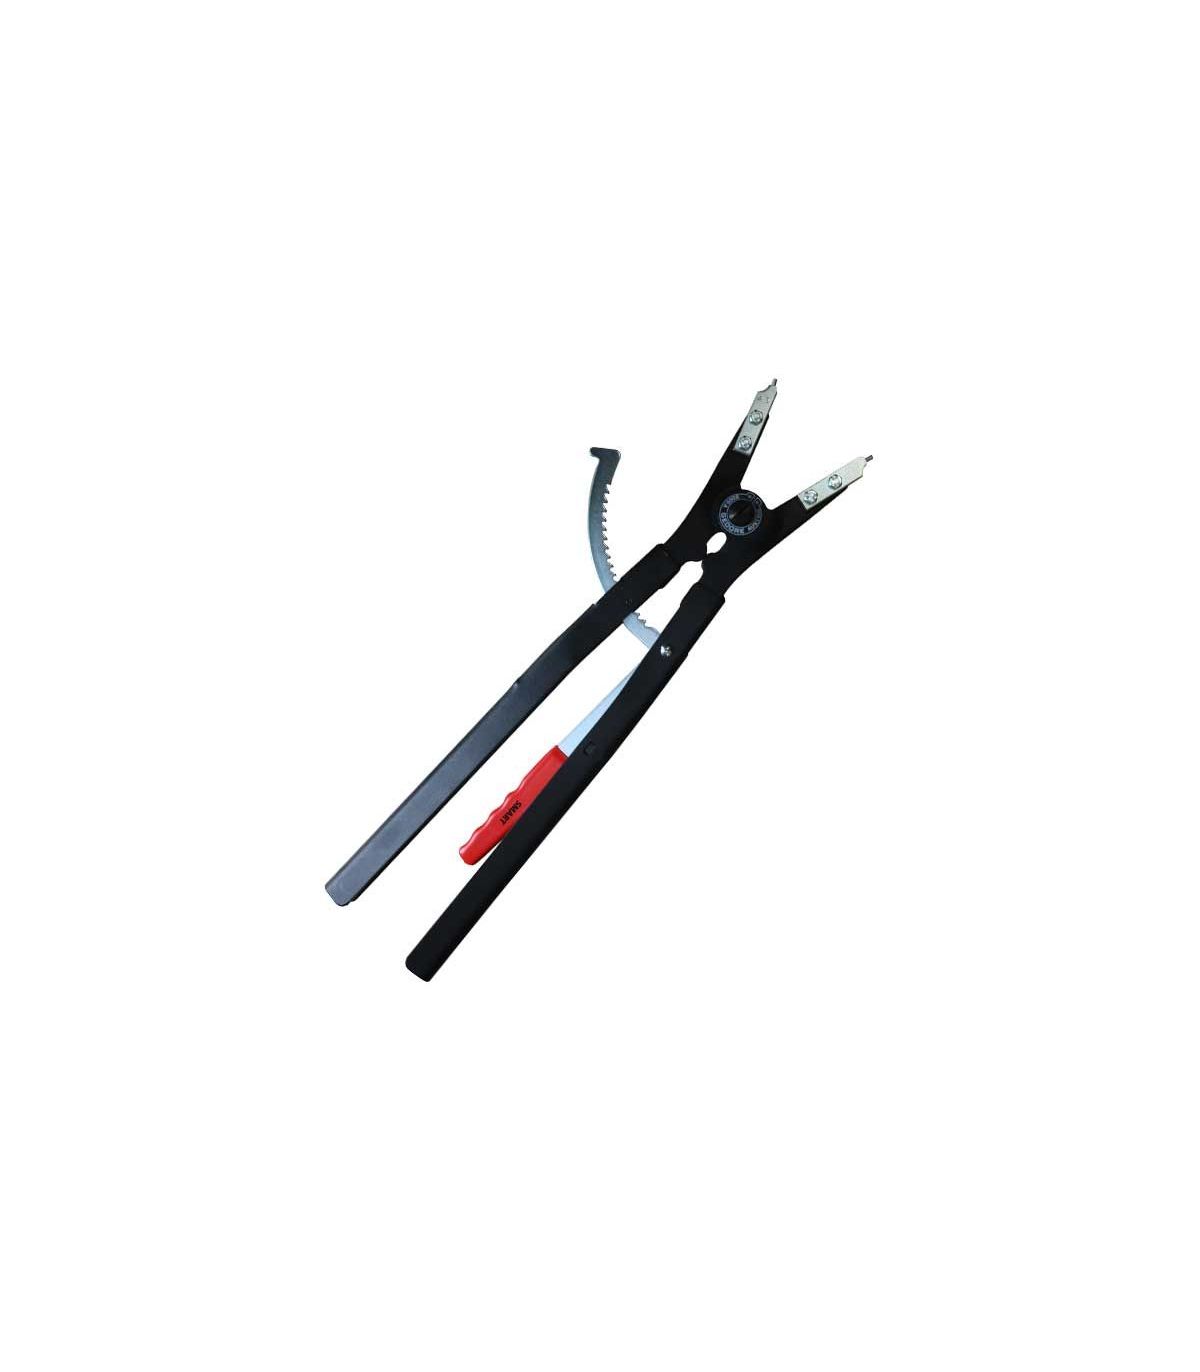 Retaining Ring Pliers - TOPTUL The Mark of Professional Tools